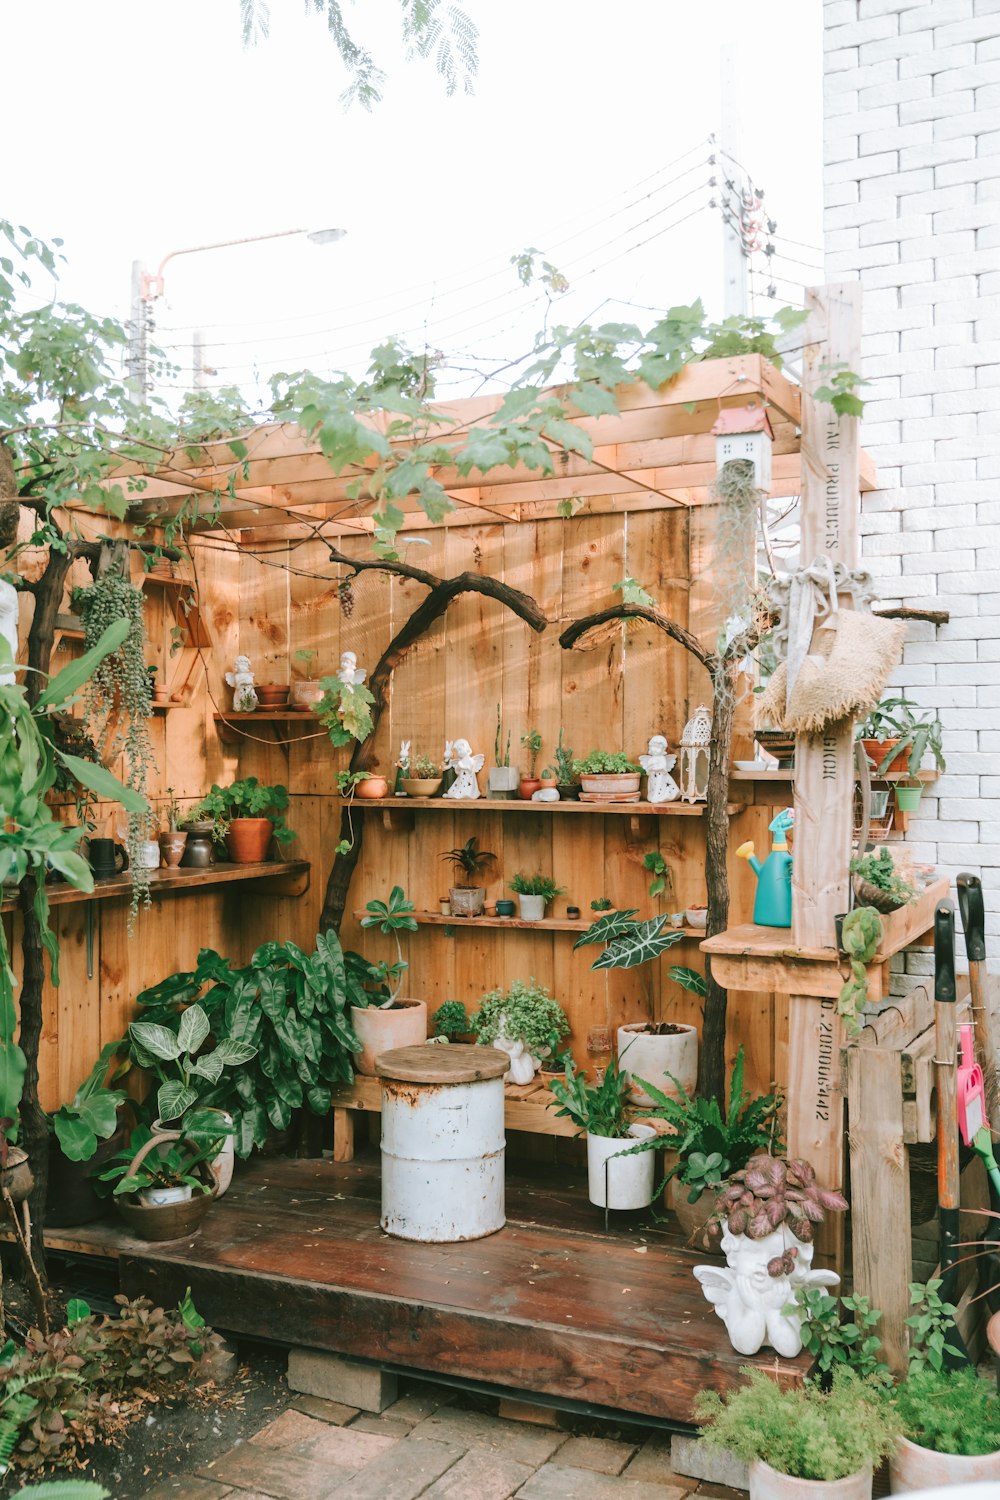 a wooden shelf filled with potted plants next to a brick wall